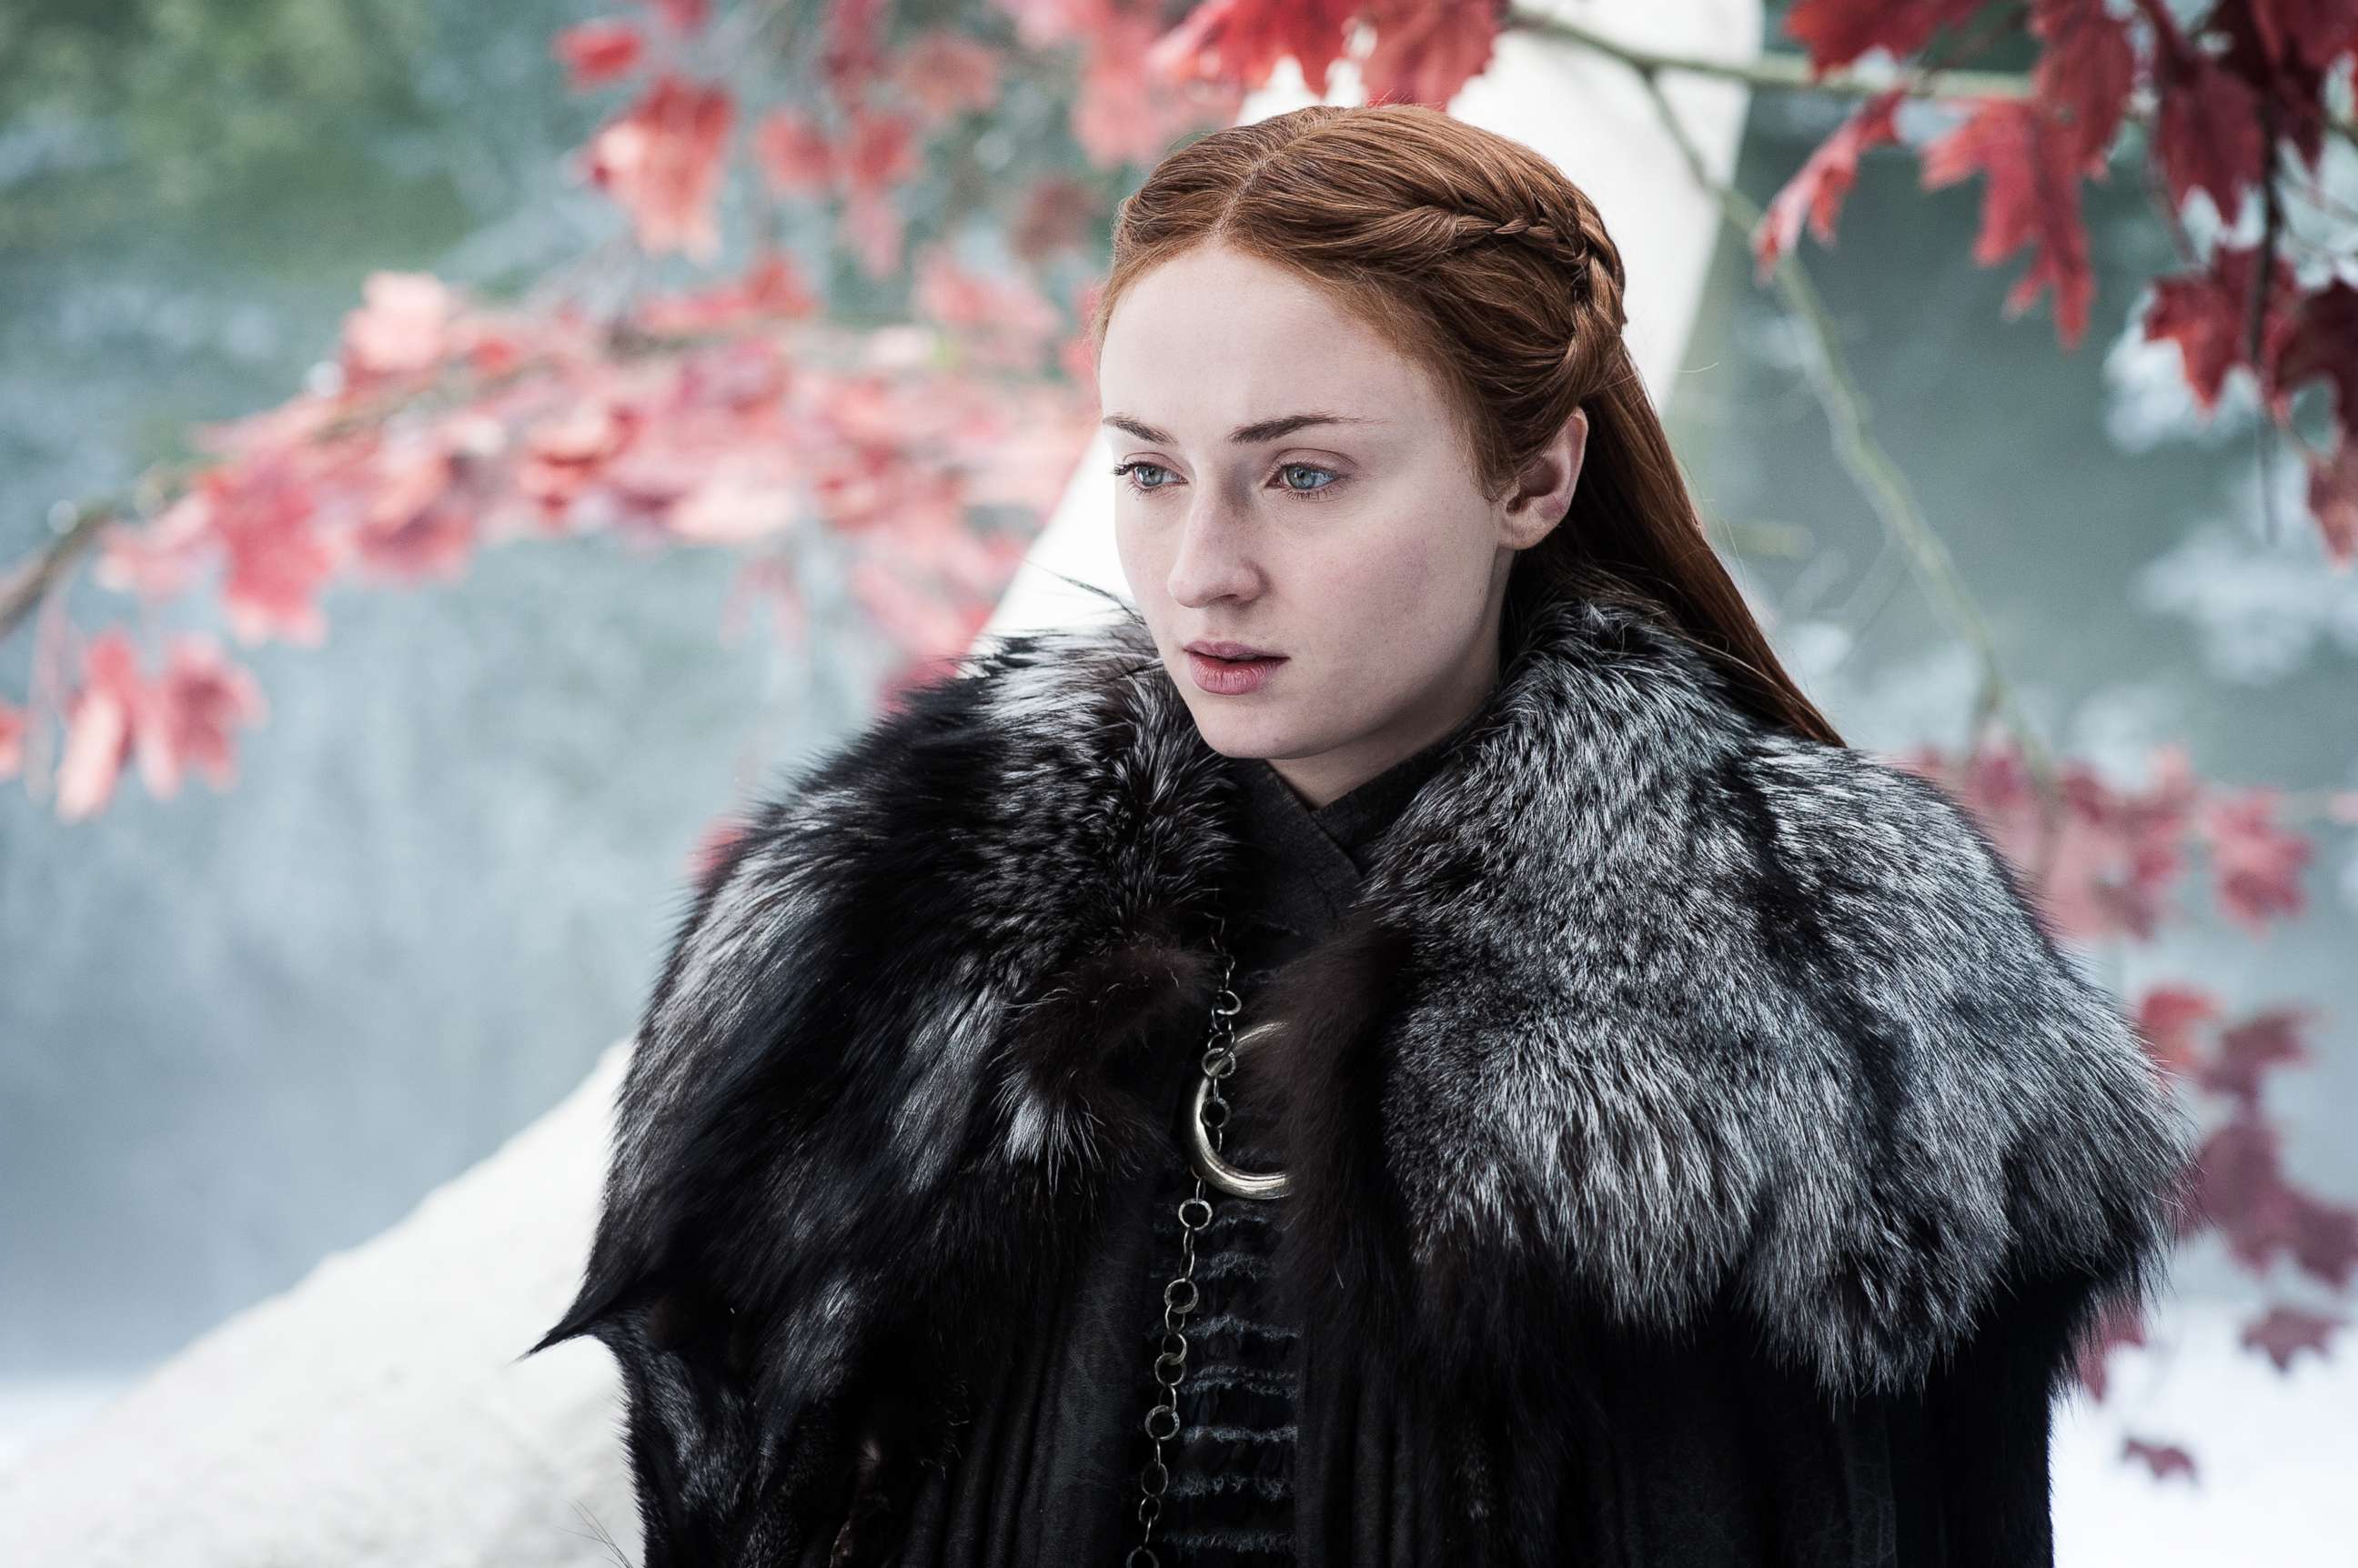 PHOTO: Sophie Turner, as Sansa Stark, in a scene from "Game of Thrones."